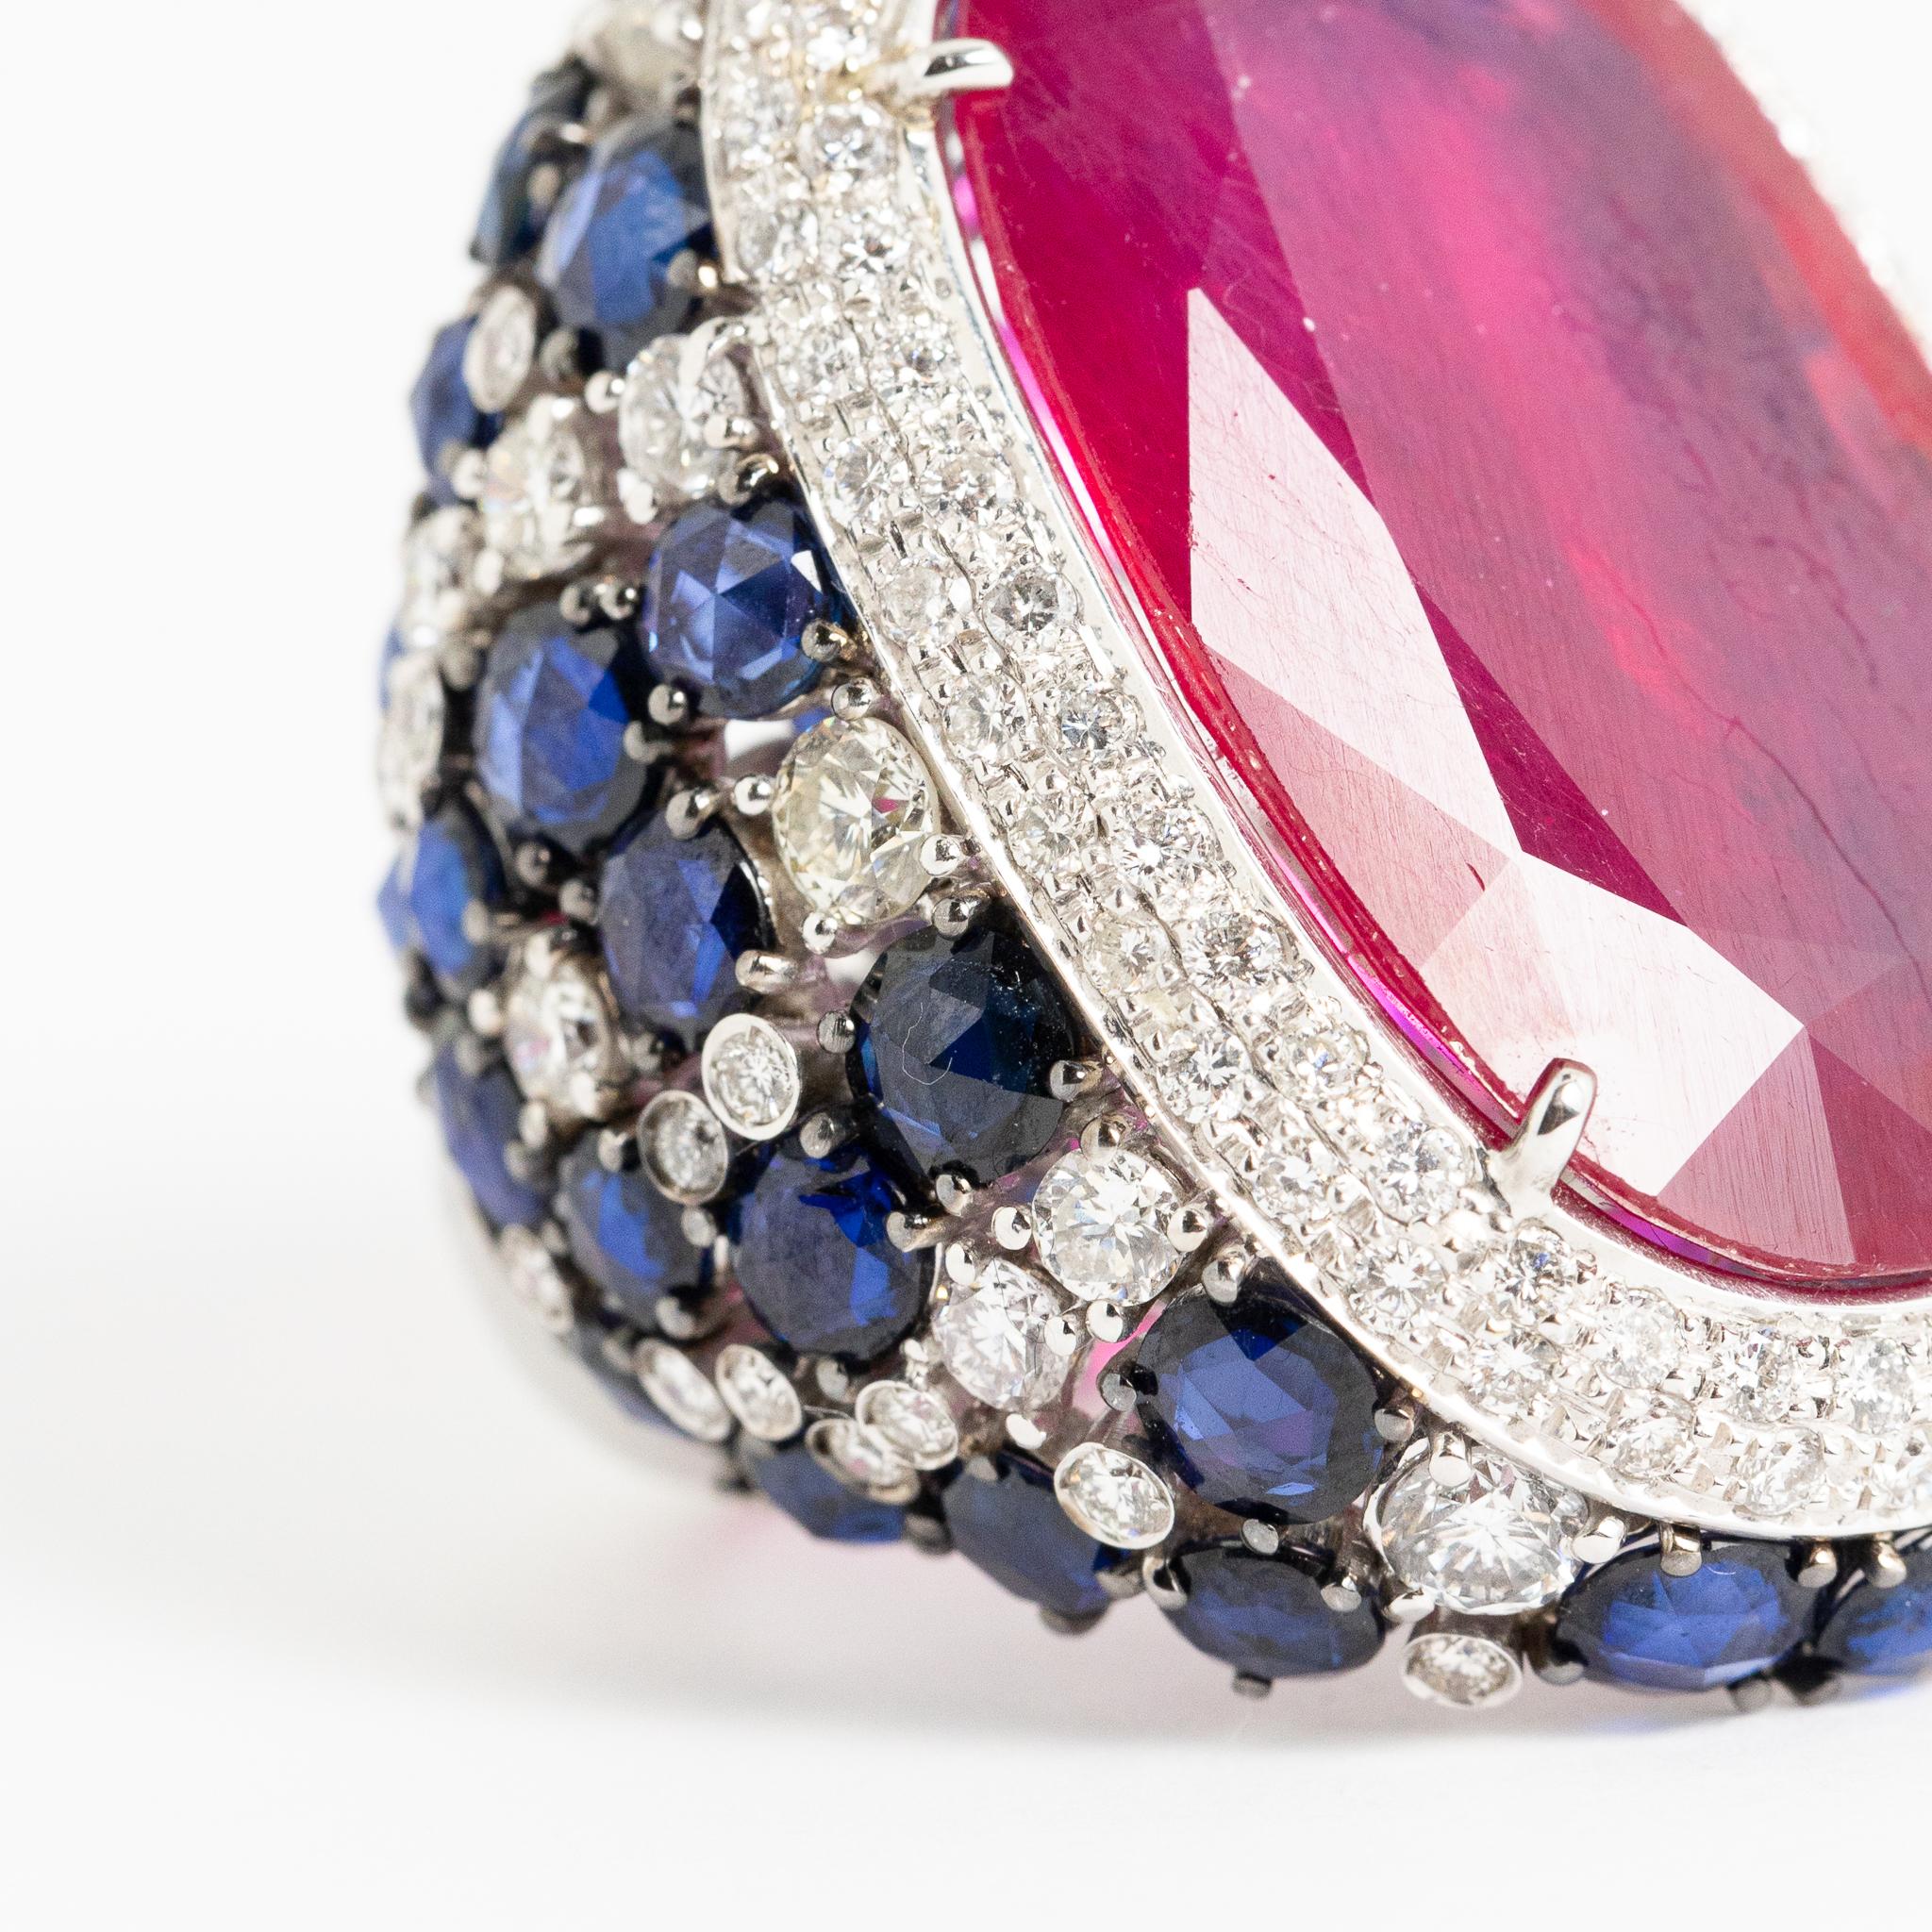 Ring made of 18 kt. white gold with diamonds, blue sapphires and glass-filled ruby signed Fraleoni.
Entirely handmade in Italy, one of a kind.
This piece features sapphires and diamonds on the ring setting and an oval-cut ruby in the center.
A